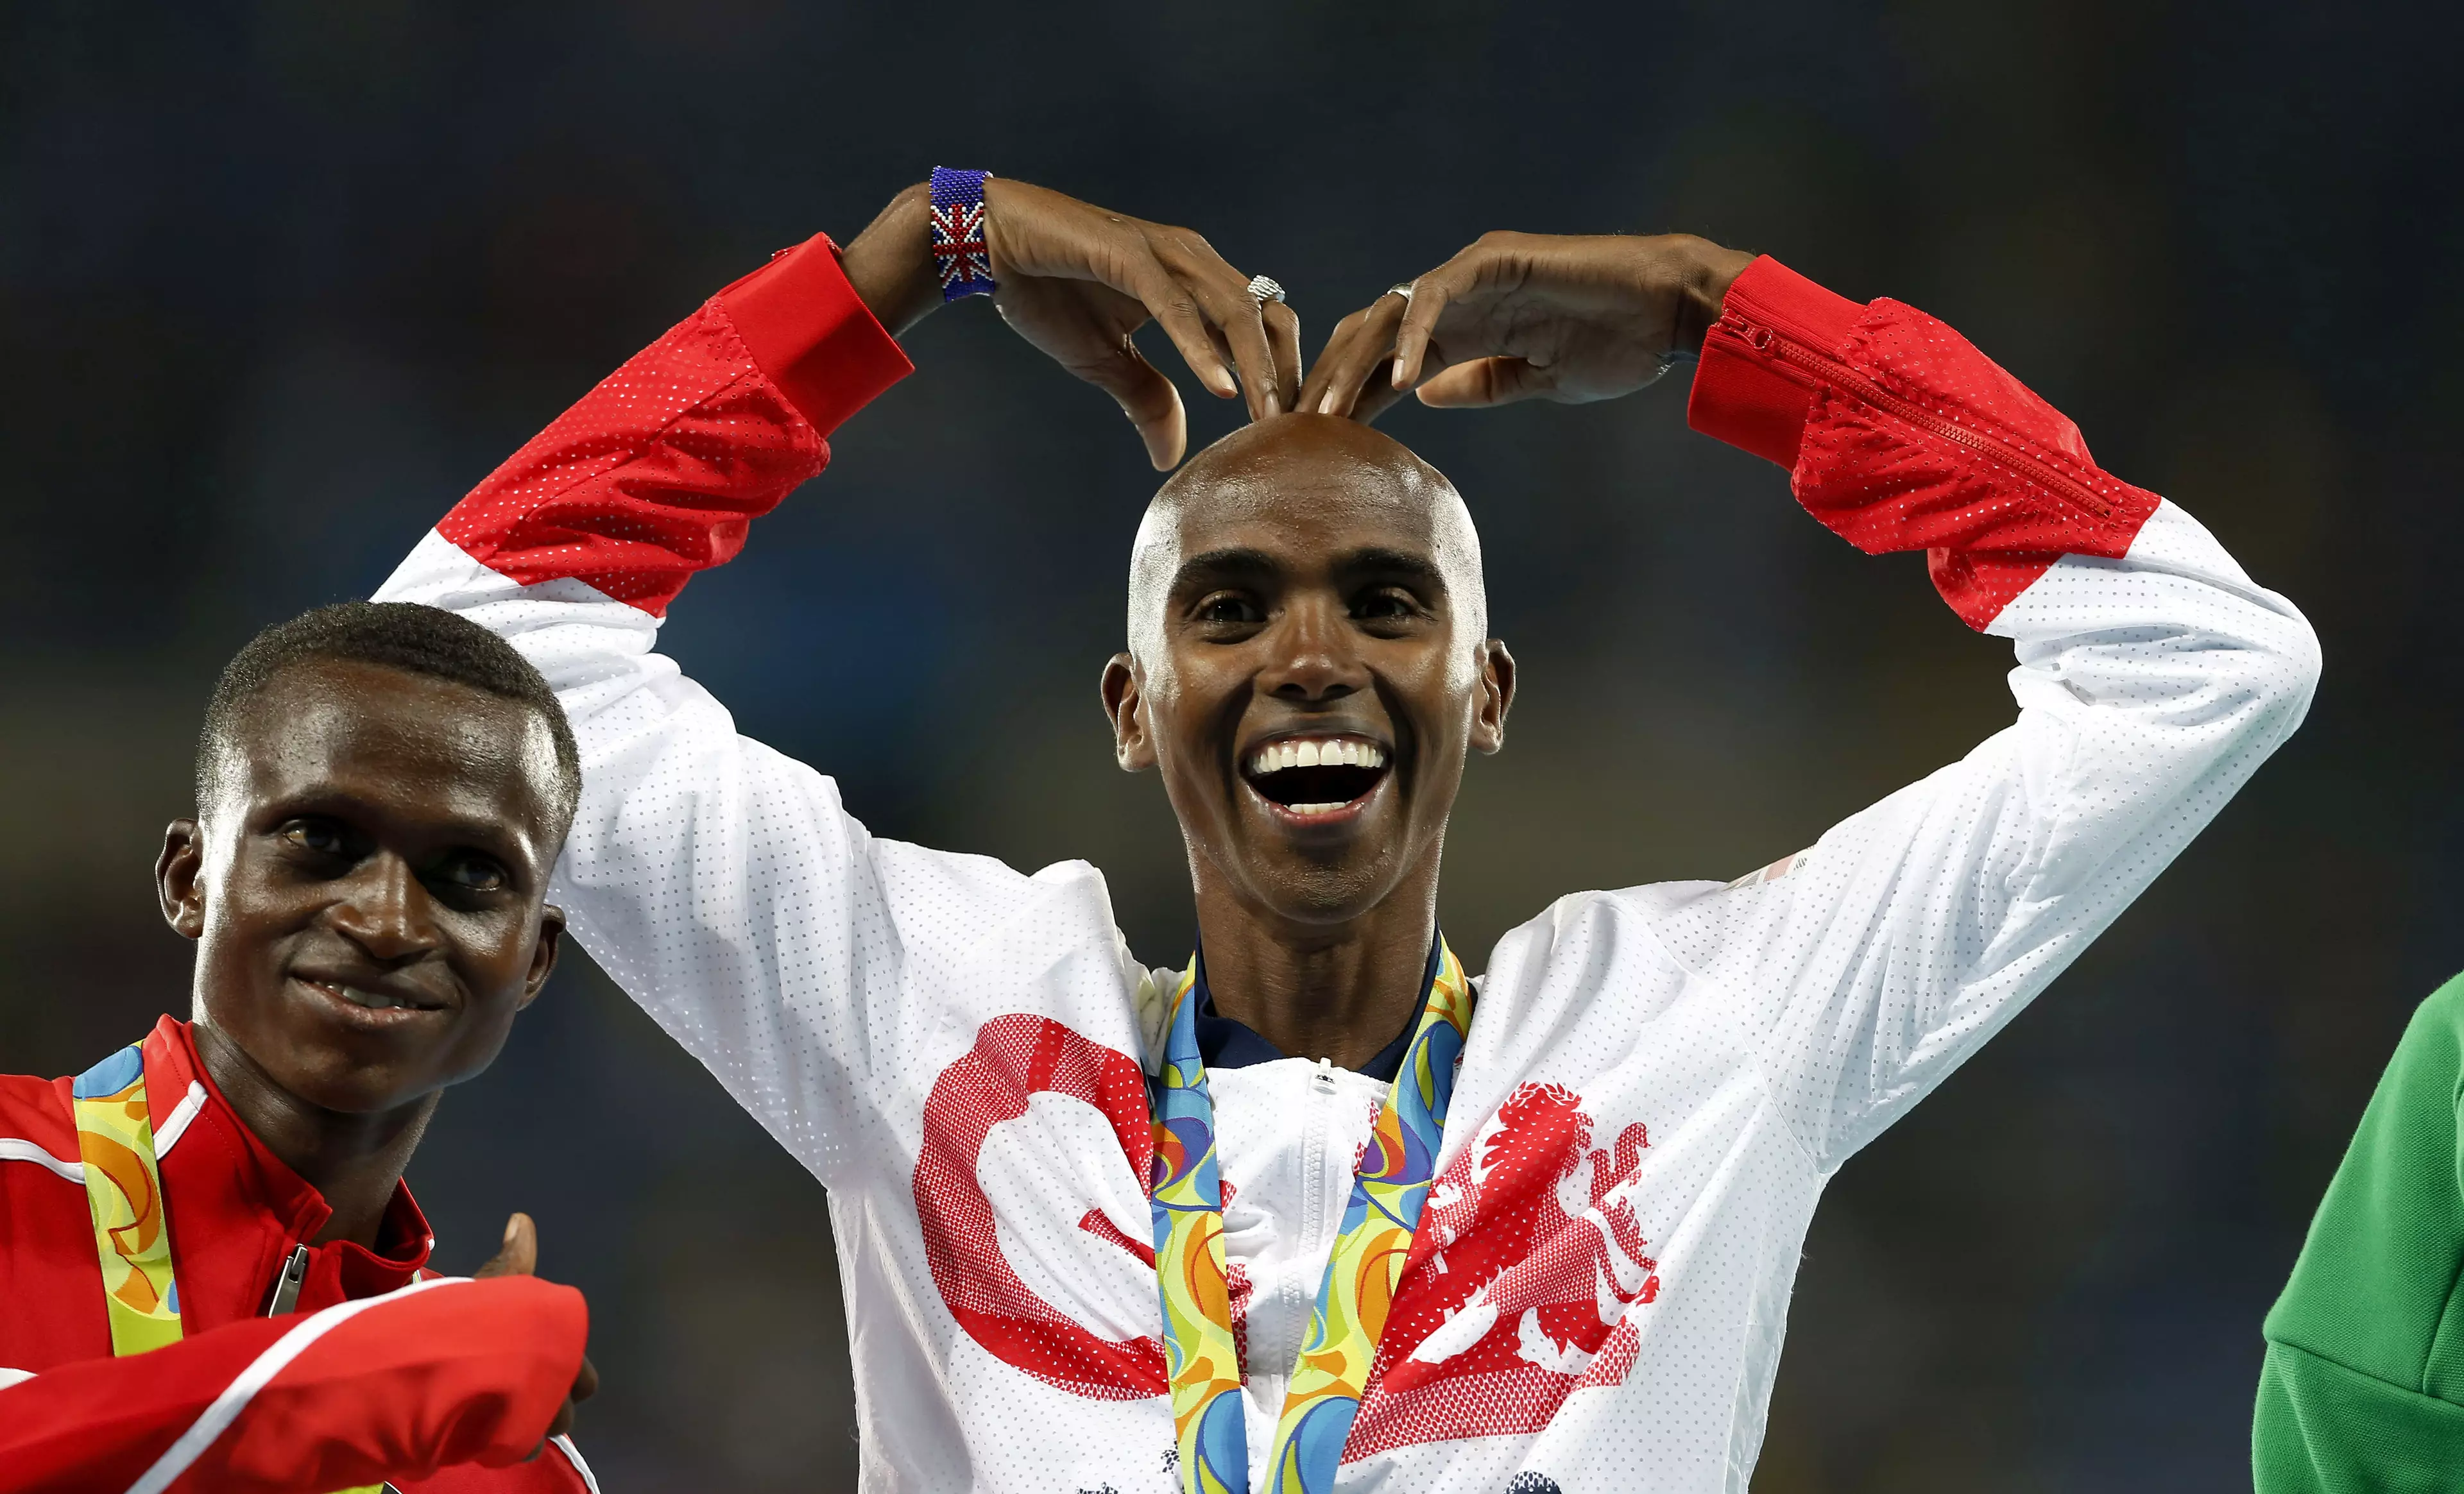 Mo Farah Set To Be Knighted After Rio Triumph